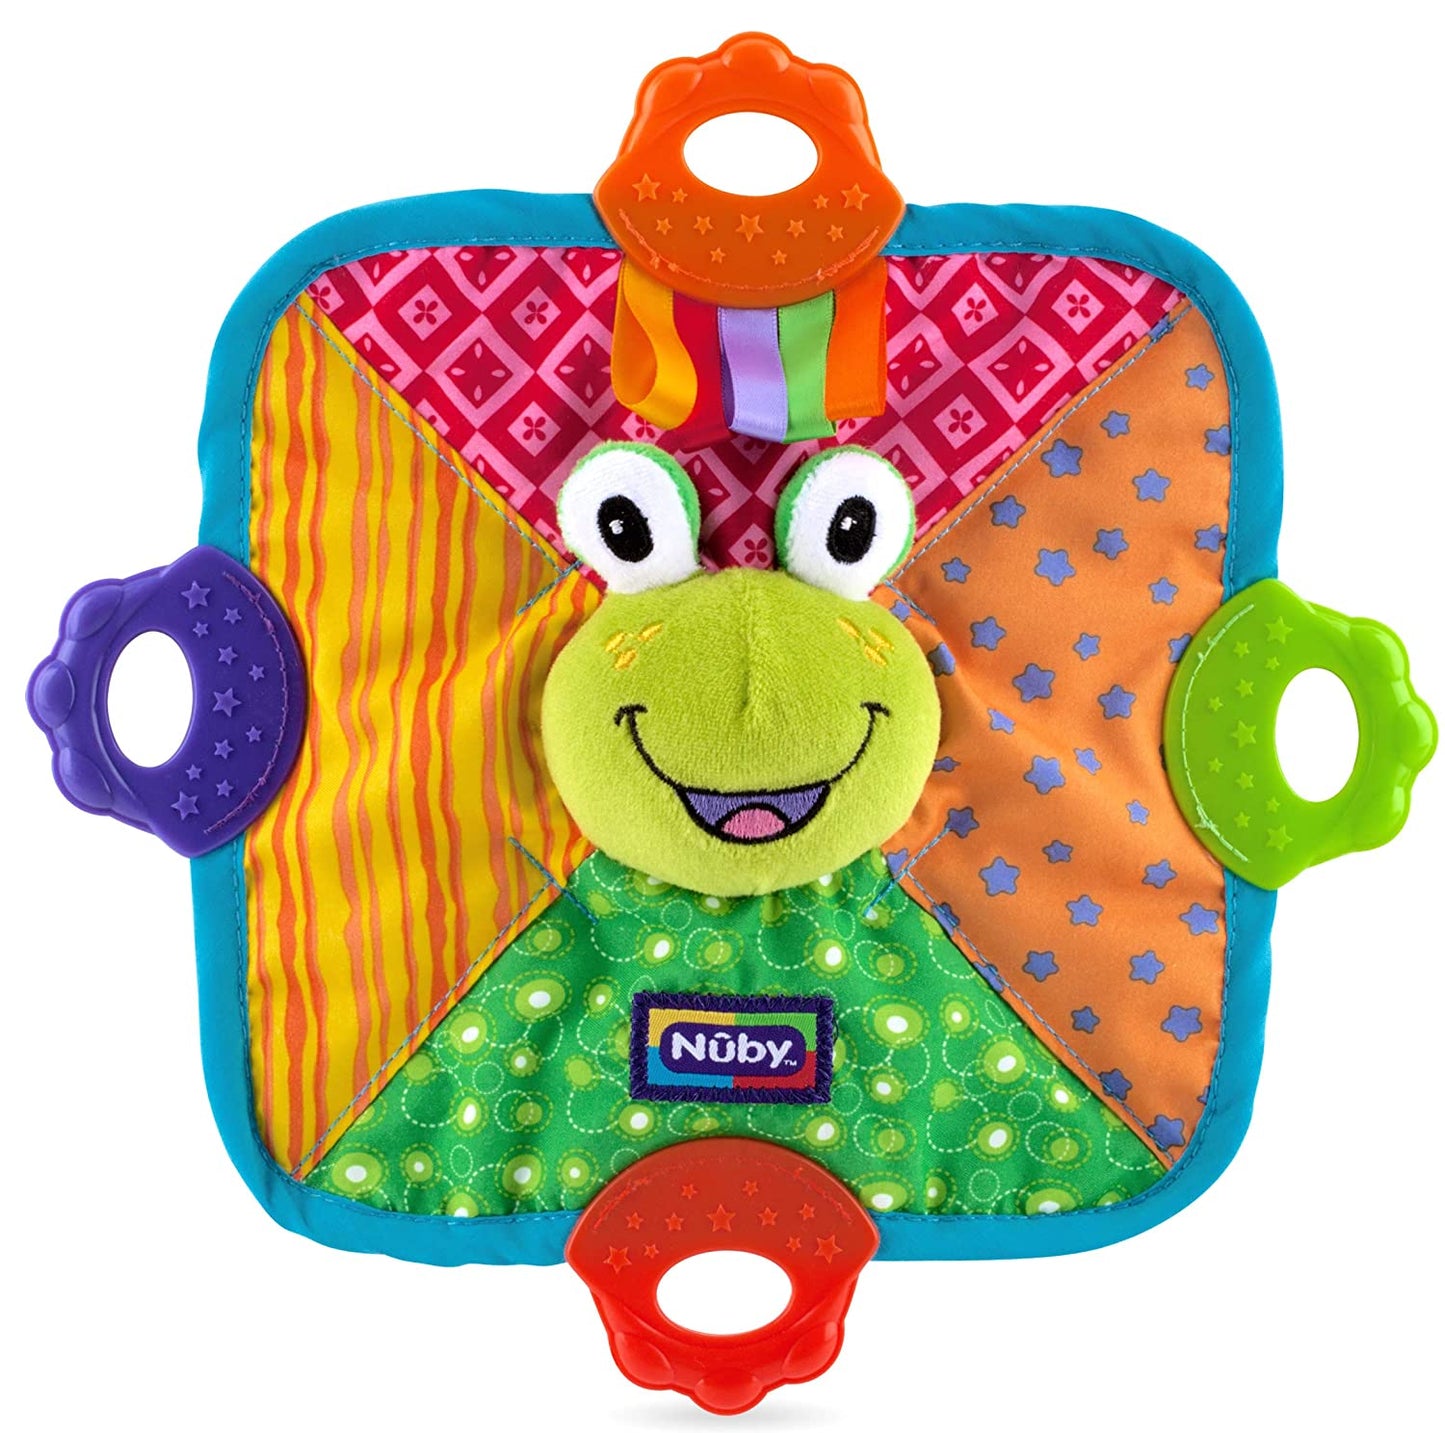 Nuby Teething Blankie Characters May Vary, Red/Yellow/Green/Orange/Blue, 1 Count